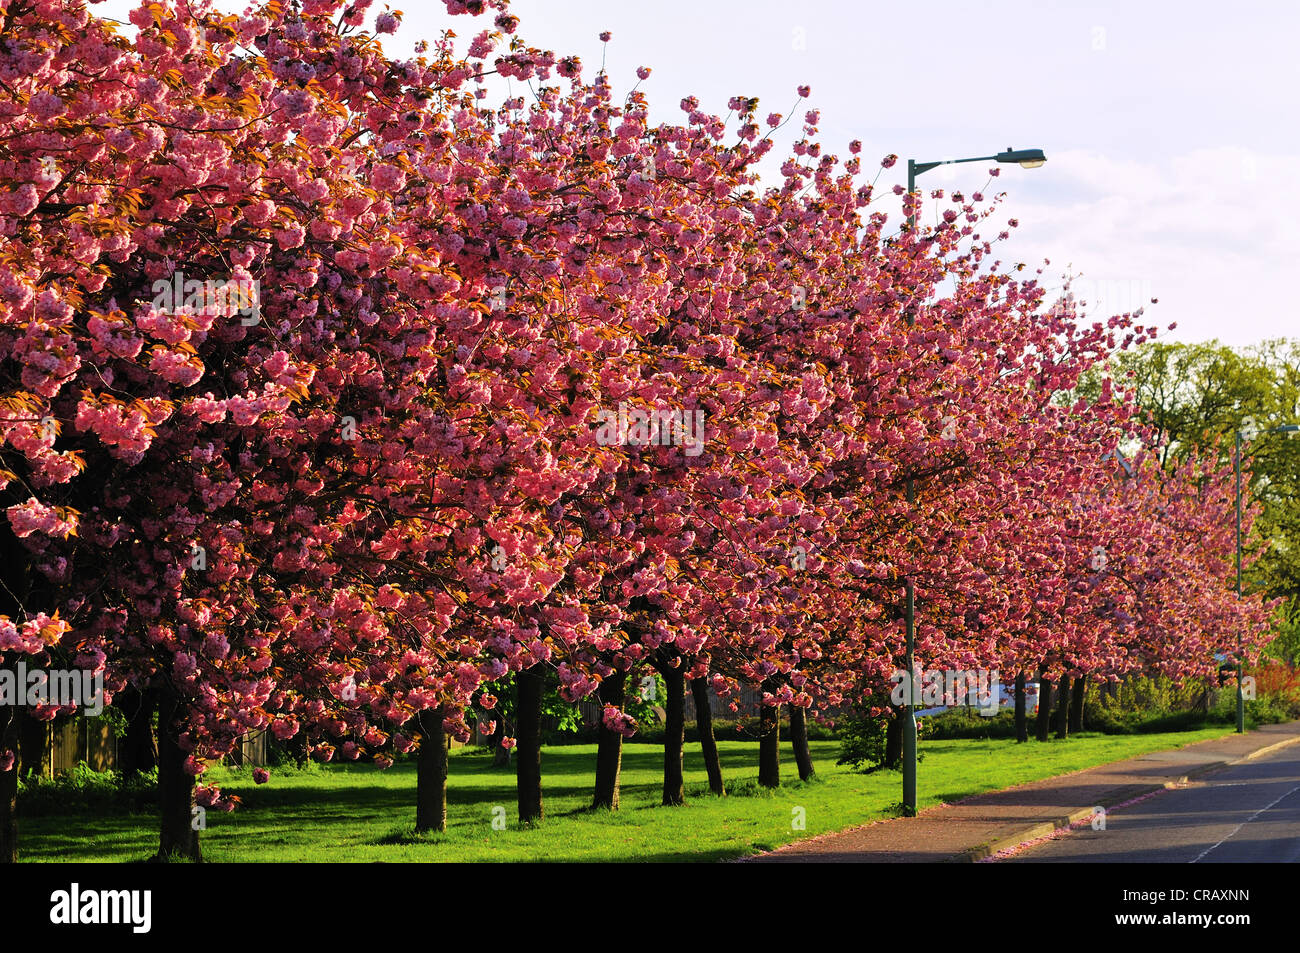 Blossoms on trees, Suffolk Stock Photo